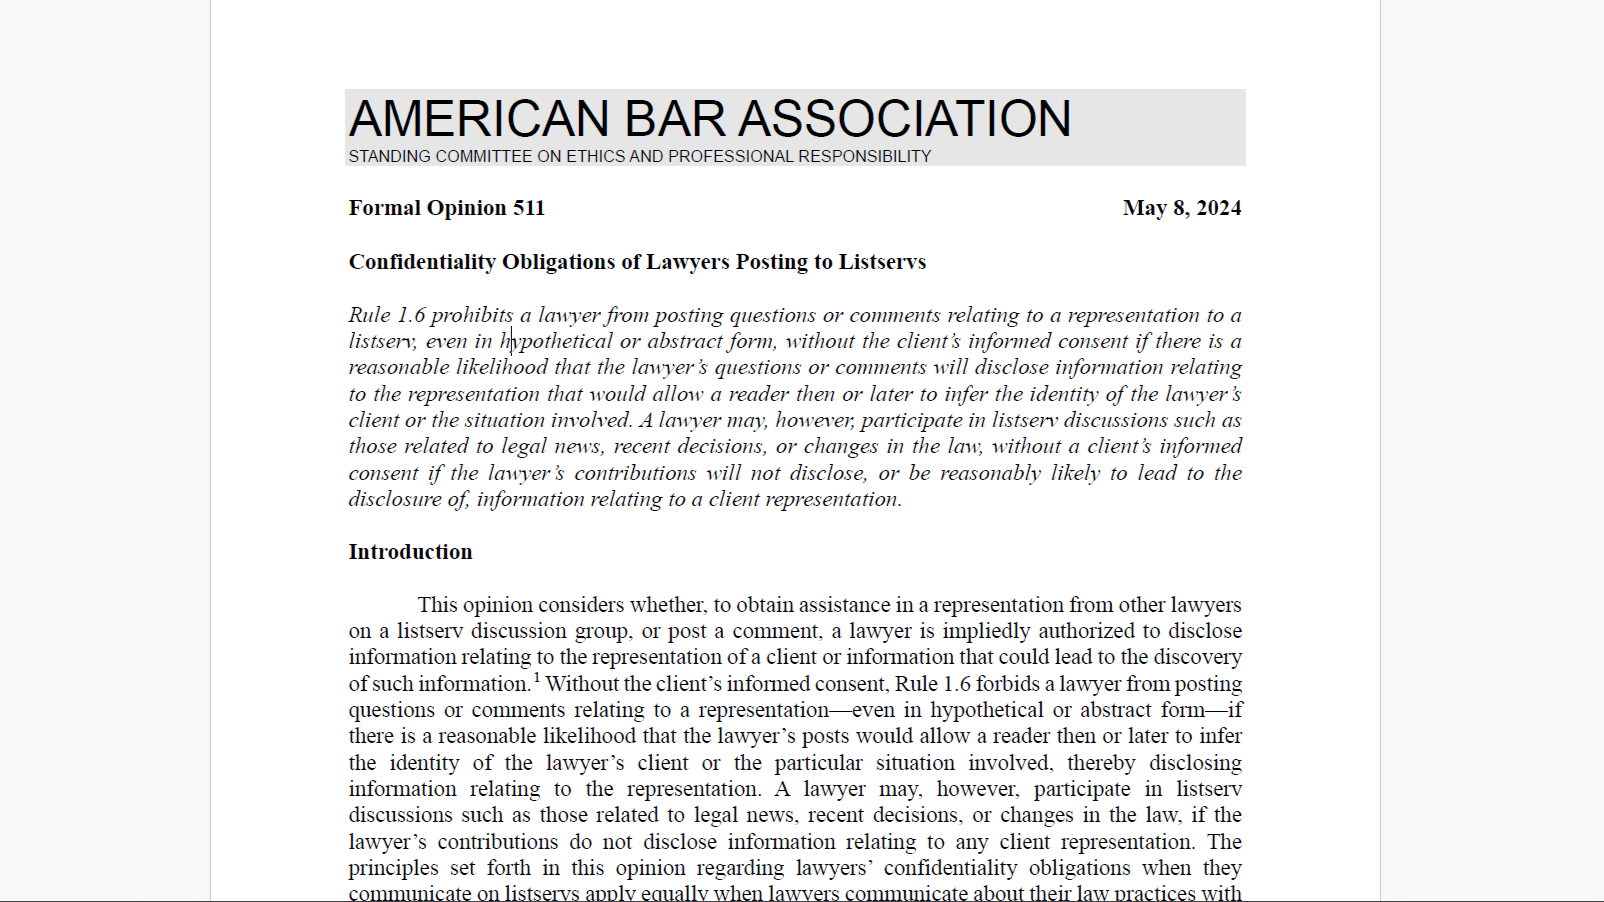 ABA Issues Ethics Opinion on 30-Year-Old Technology whose Use Is Waning. My Question: Why Now?